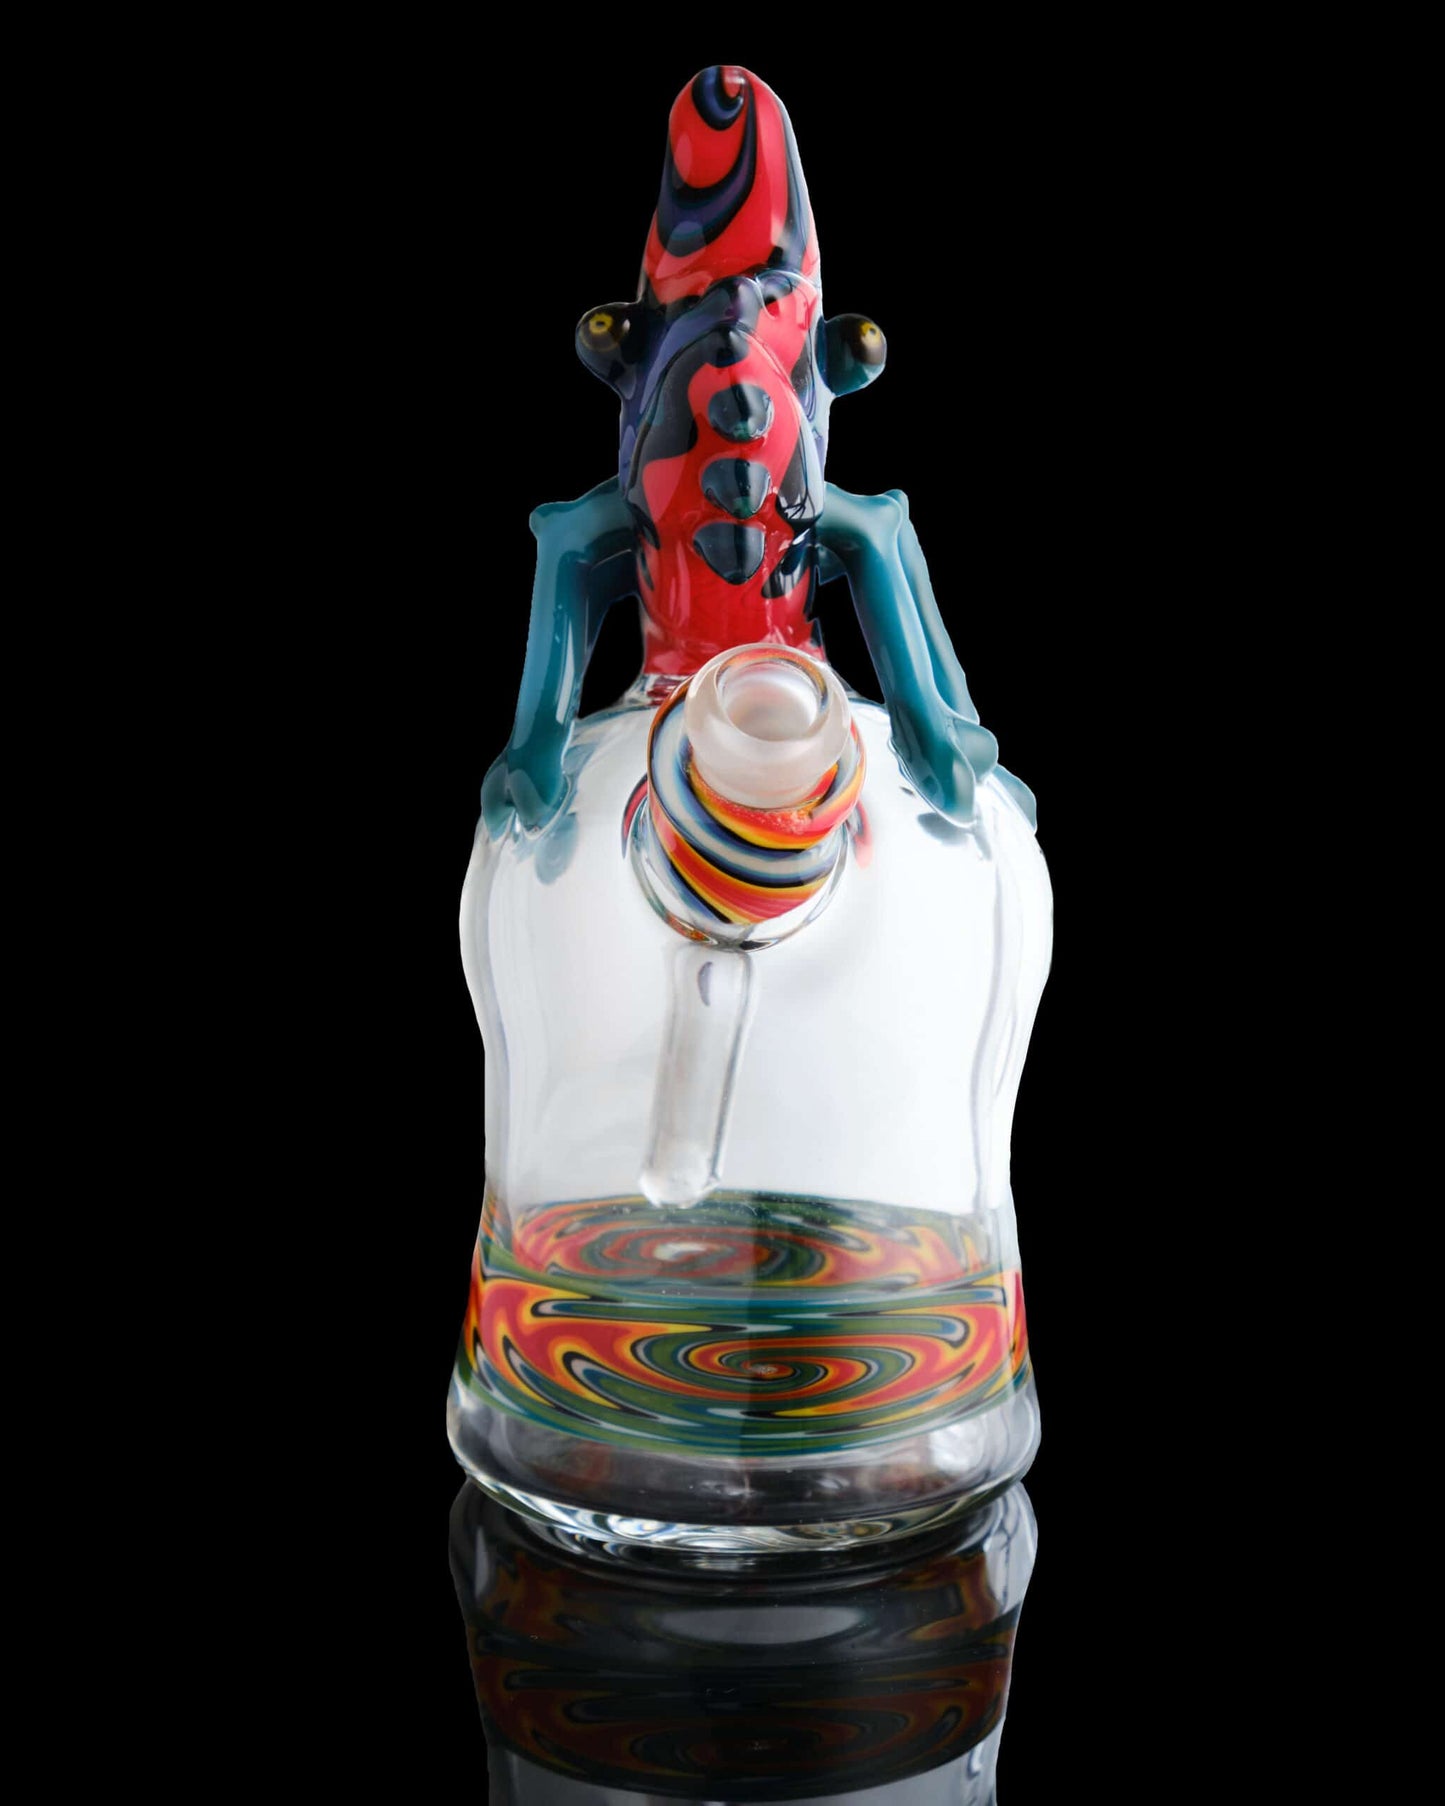 innovative design of the Aztec/Fire/Ice w/ Aqua Azul Limbs Chameleon on Wig Wag Rig by Willy That Glass Guy